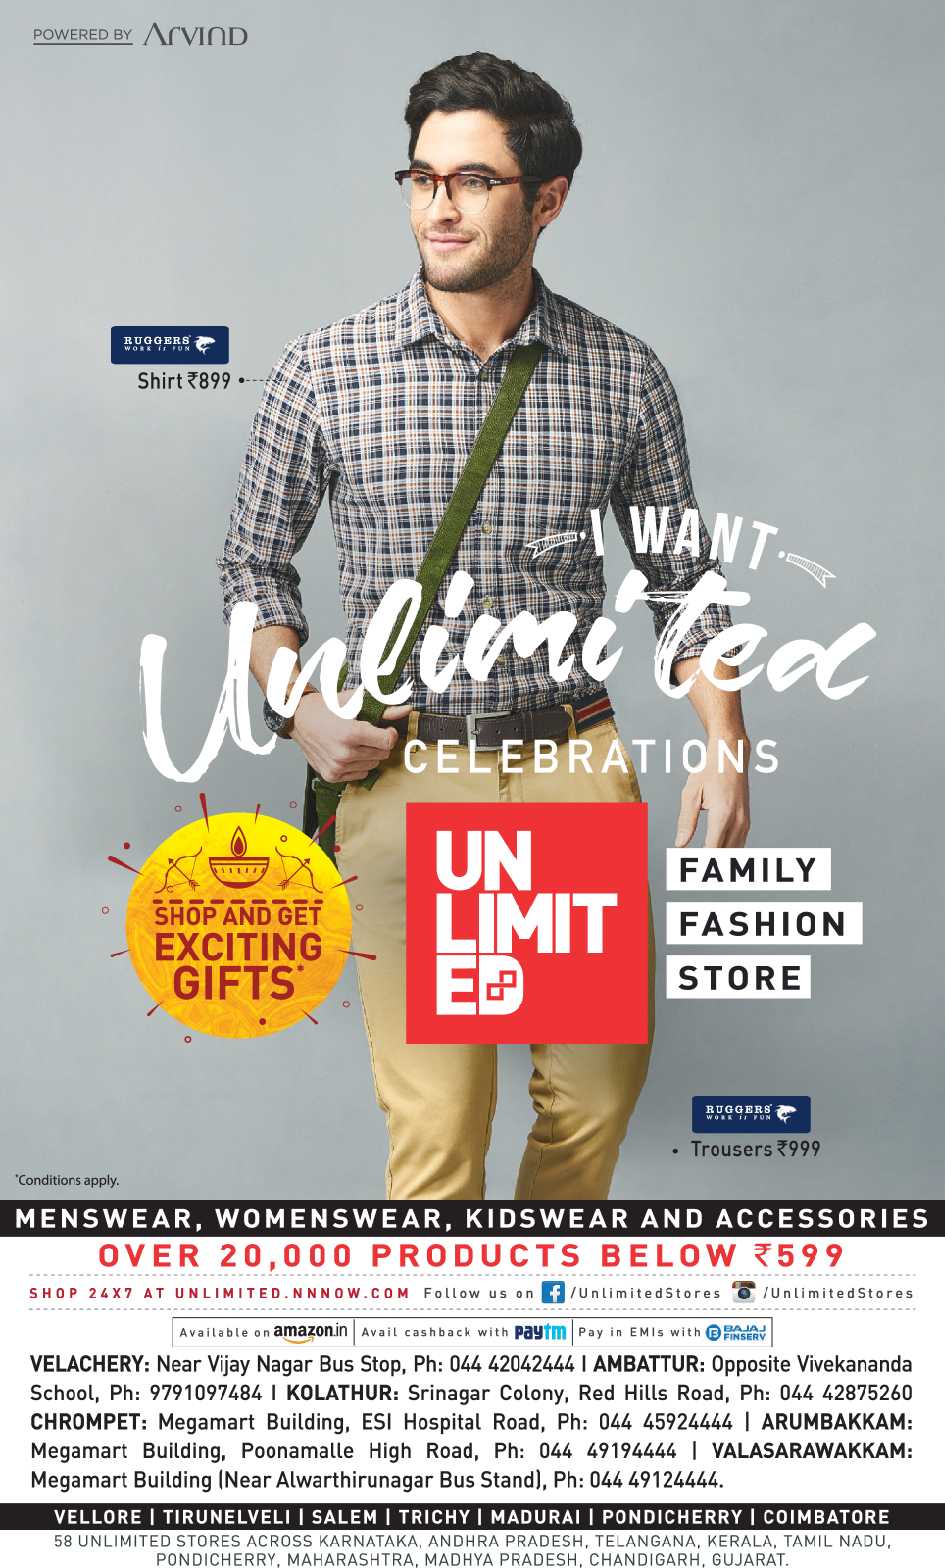 Unlimited I Want Celebarations Family Fashion Store Shop And Get ...